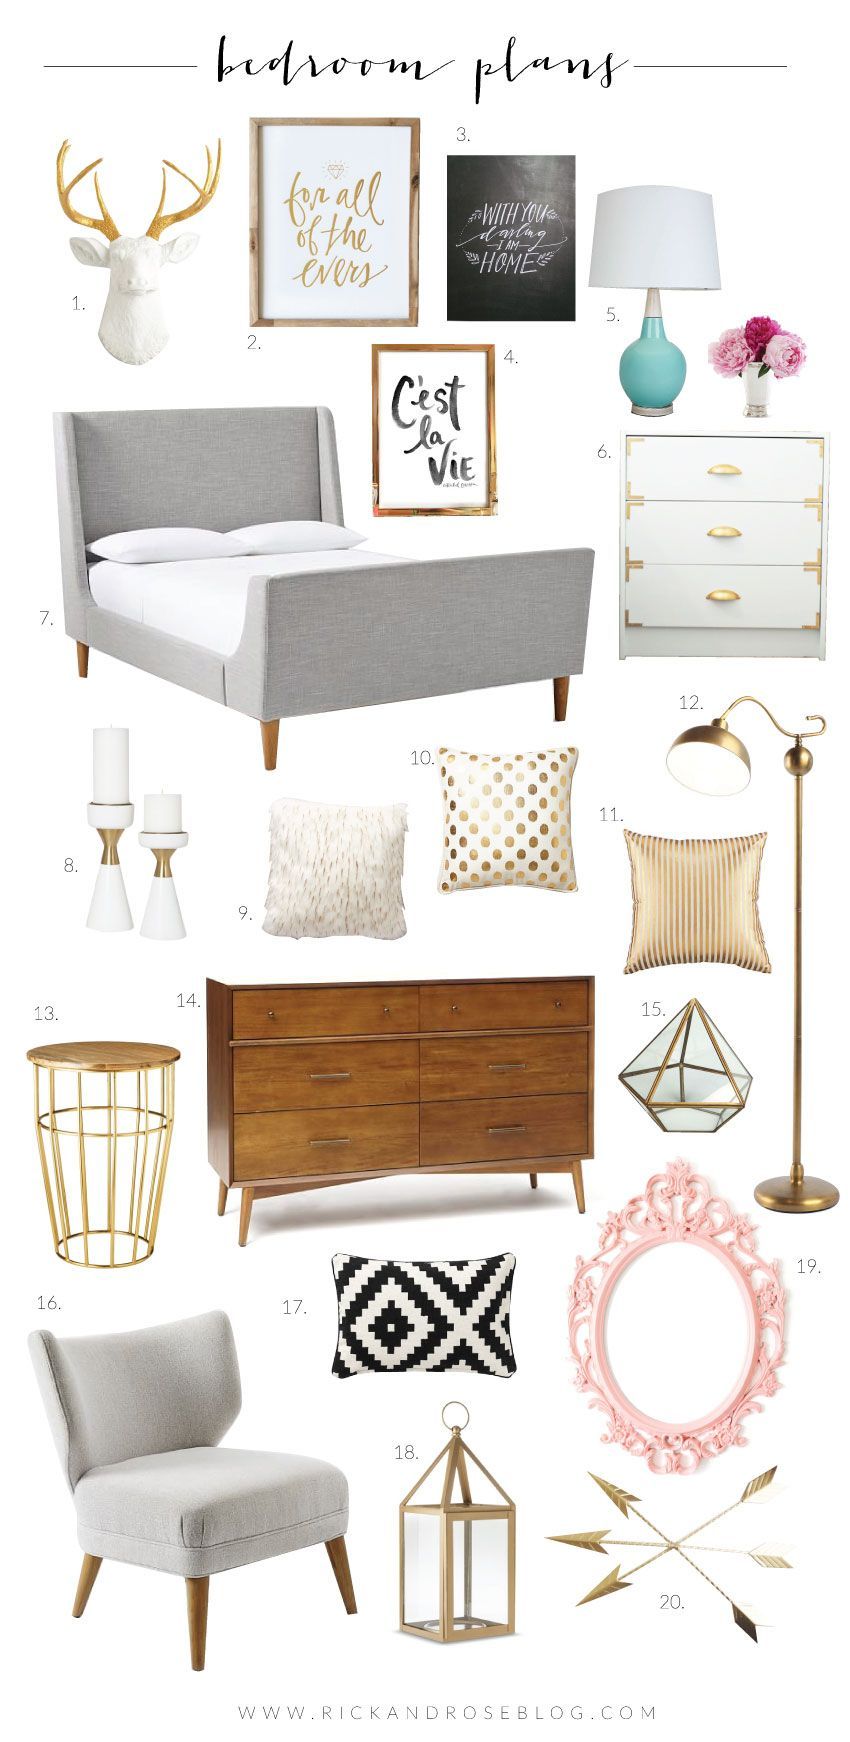 This is our master bedroom plans, as you can see I have gold fever, and want to mix it with black, gray, mint and a little touch